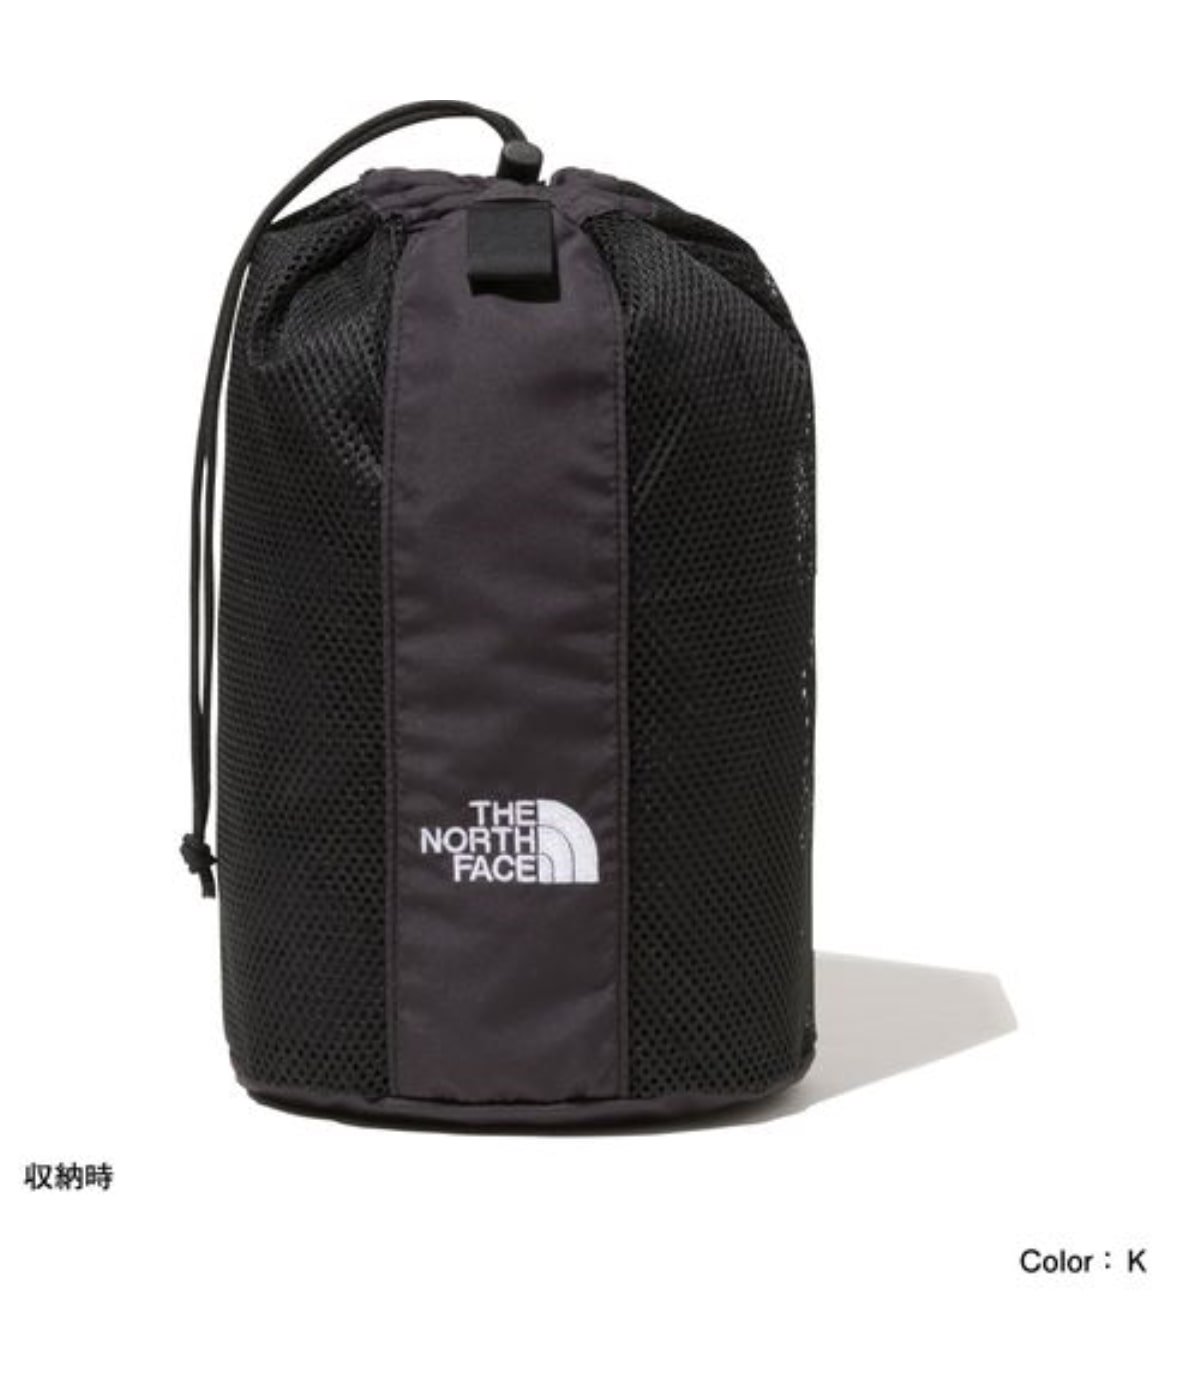 THE NORTH FACE ノースフェイス Baby Compact Carrier ベイビー